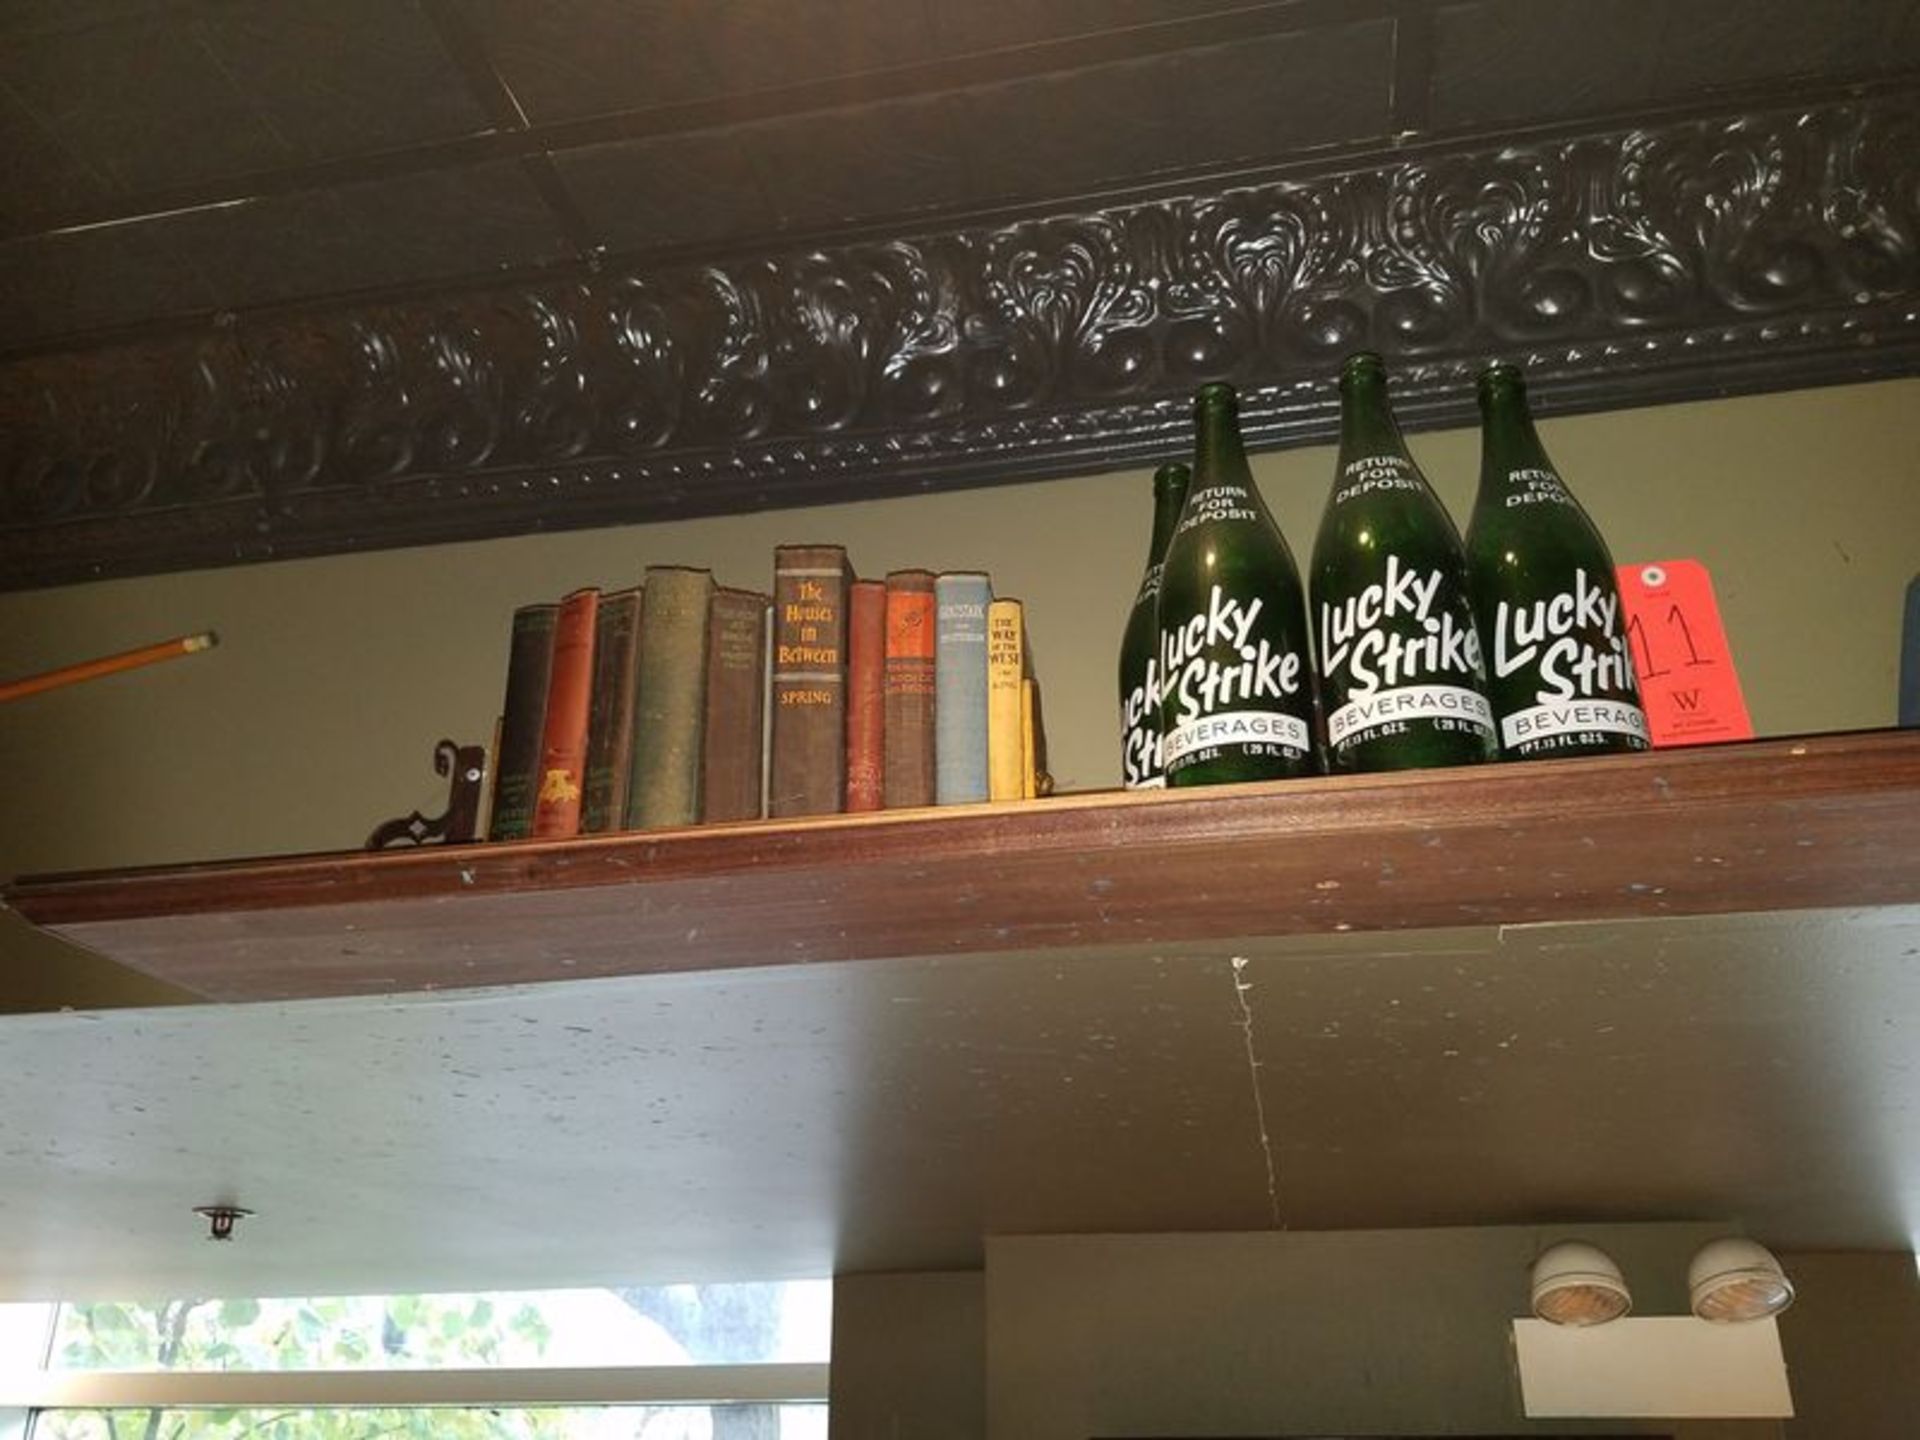 Lot - Assorted Books, Lucky Strike Bottles, Misc., with Shelf (Wall-Mounted) - Image 3 of 4